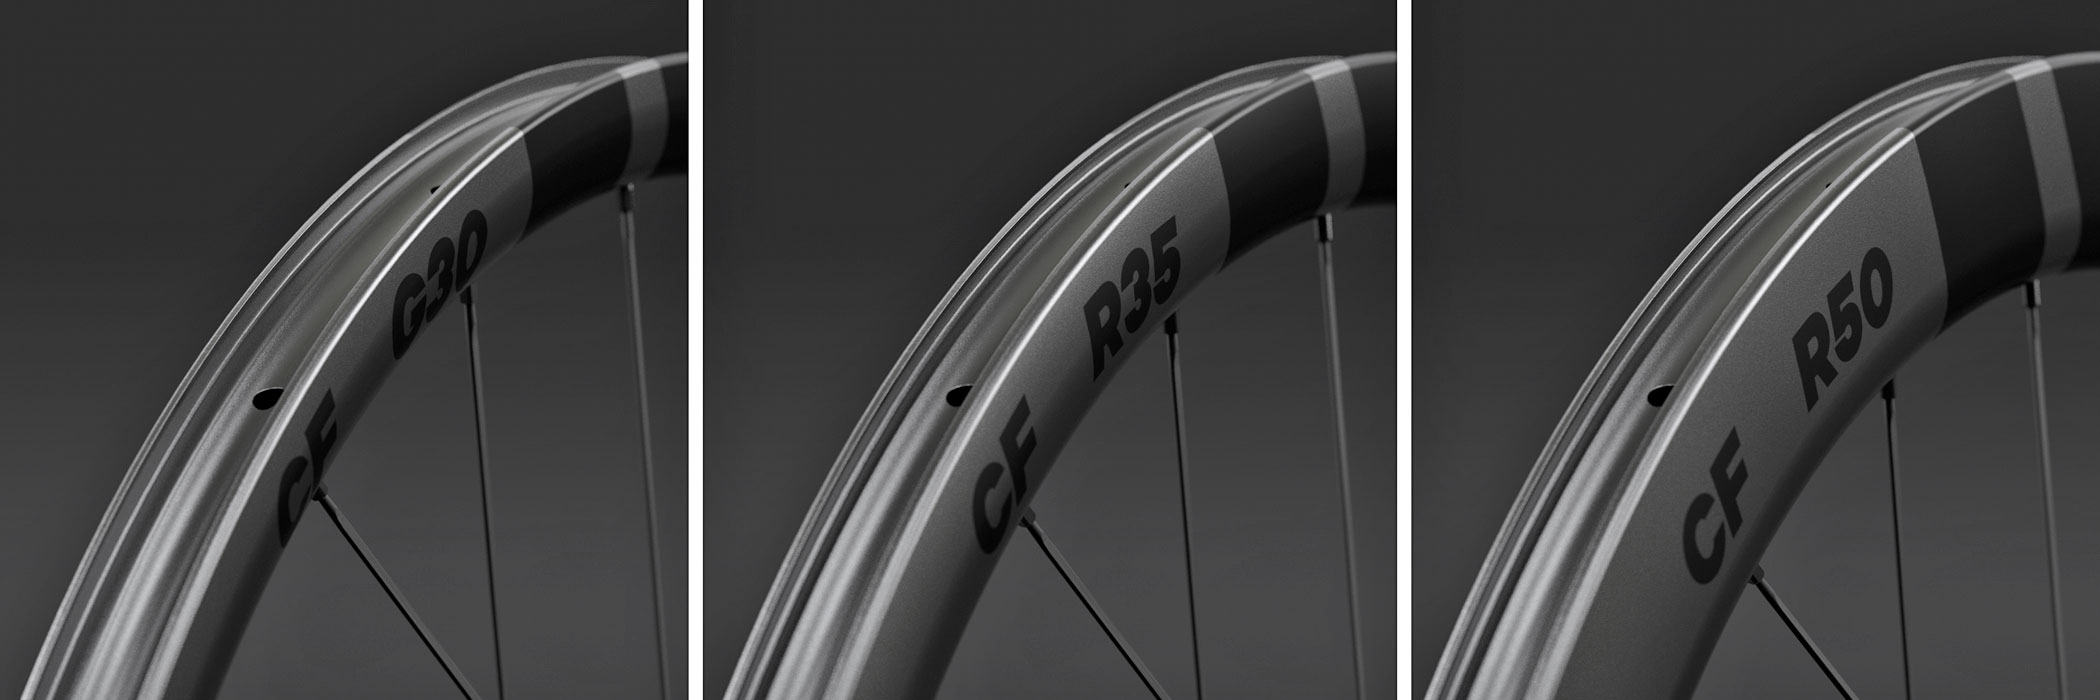 Classified Carbon Wheelsets, gravel & all-road wheels with wireless 2x internal gear hub built-in, tubeless rim profiles